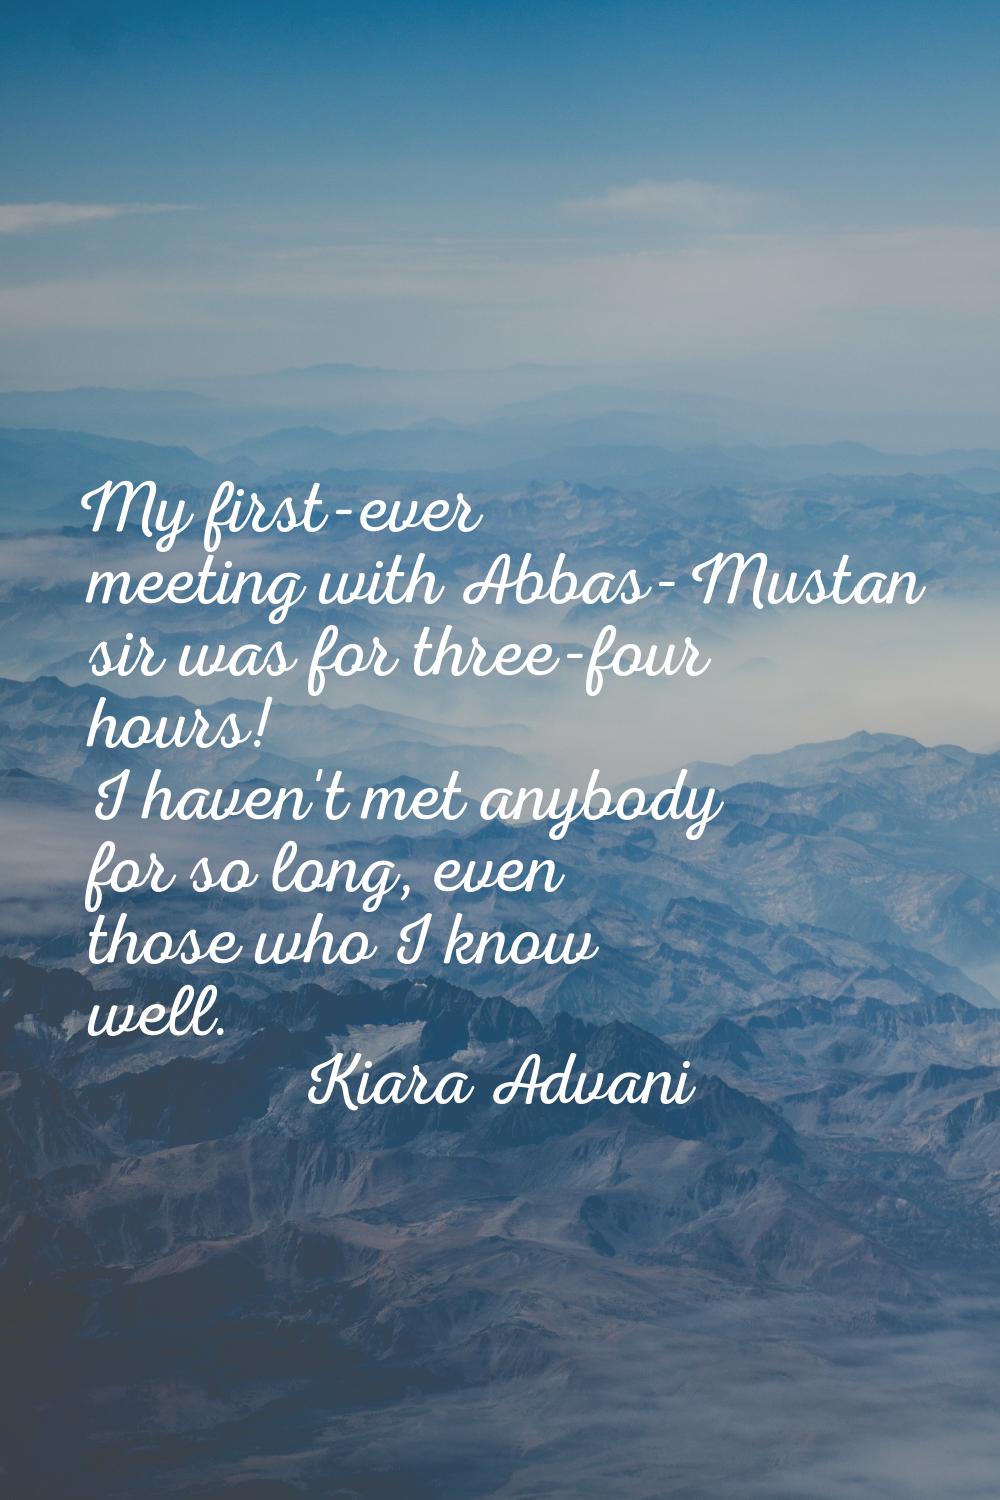 My first-ever meeting with Abbas-Mustan sir was for three-four hours! I haven't met anybody for so 